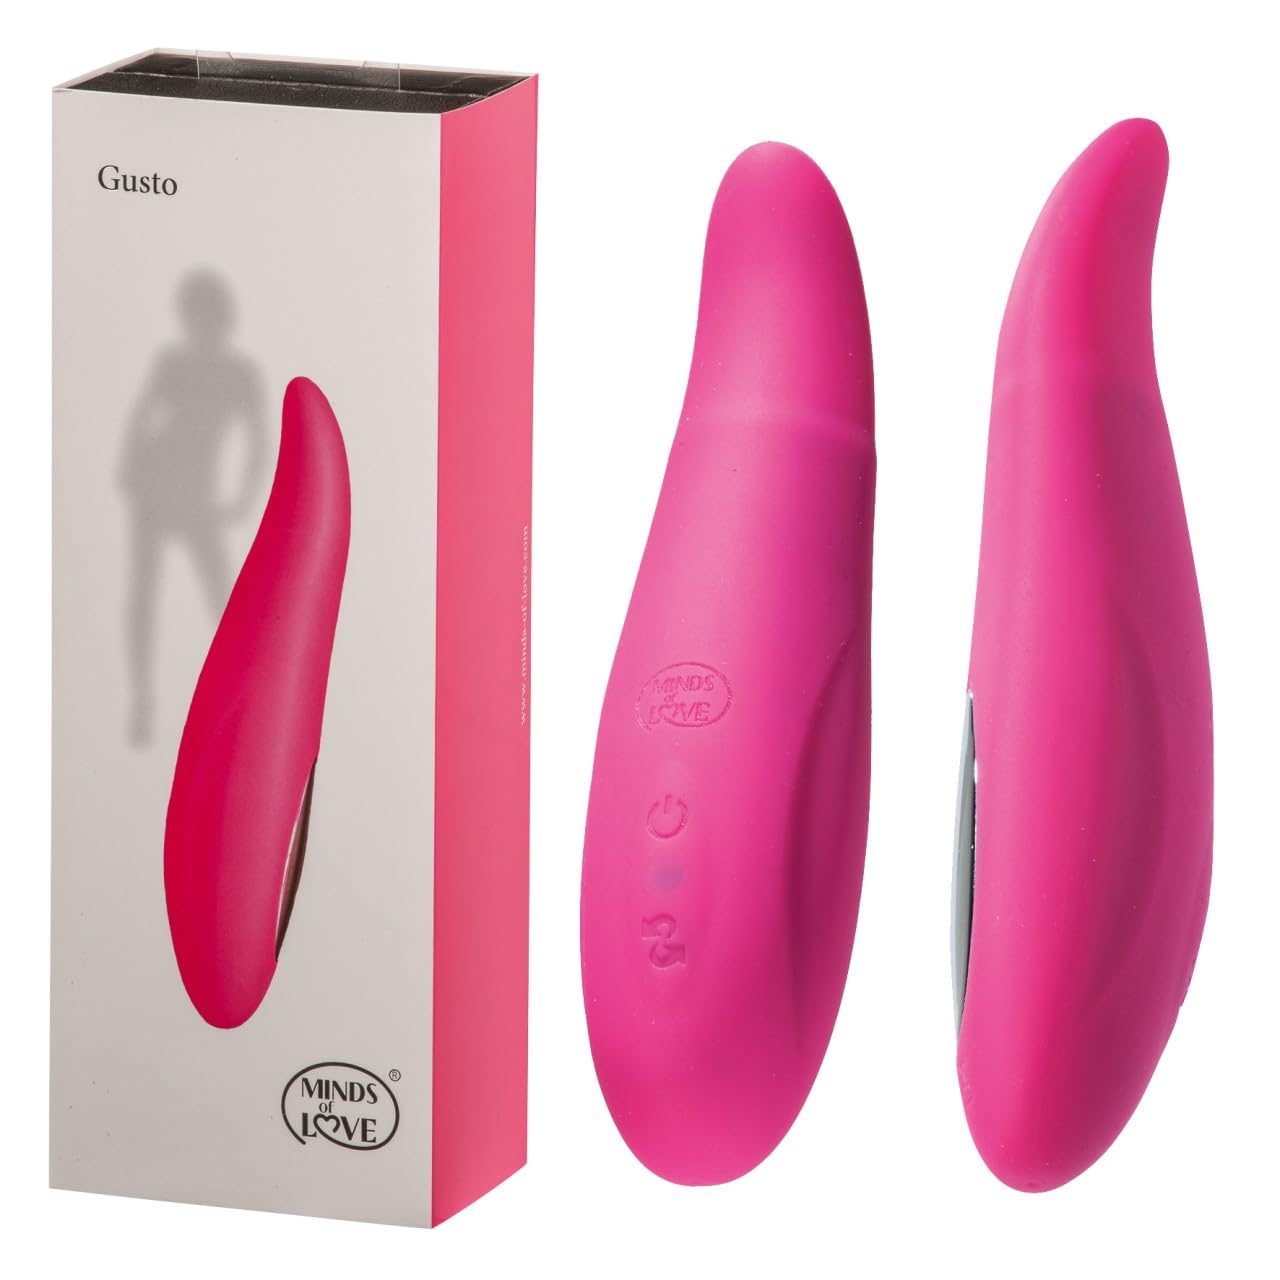 Minds of Love Gusto Vibrator pink